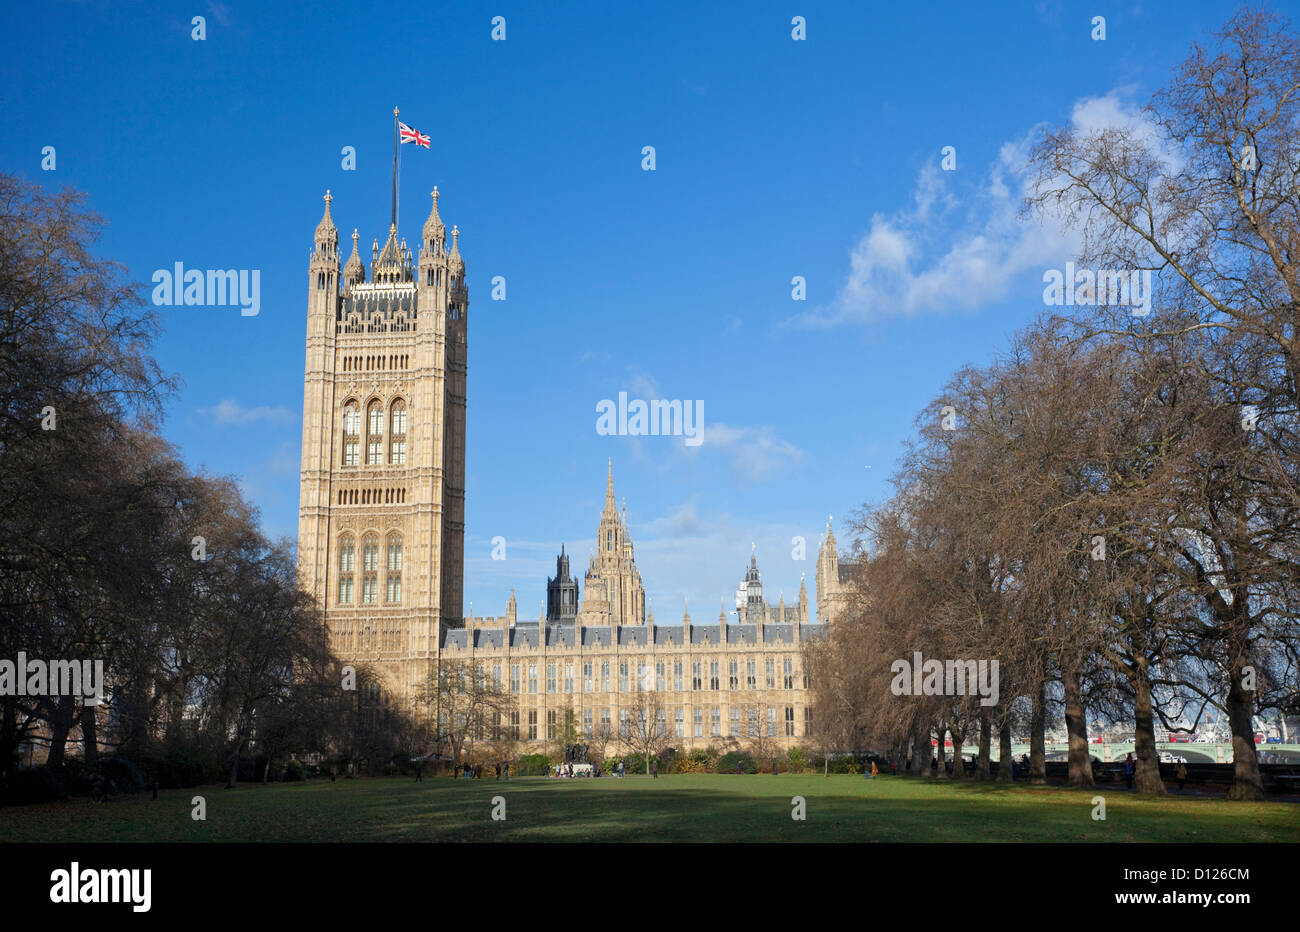 Victoria Tower Gardens and the Palace of Westminster (aka the Houses of Parliament) in the background, London, England, UK Stock Photo